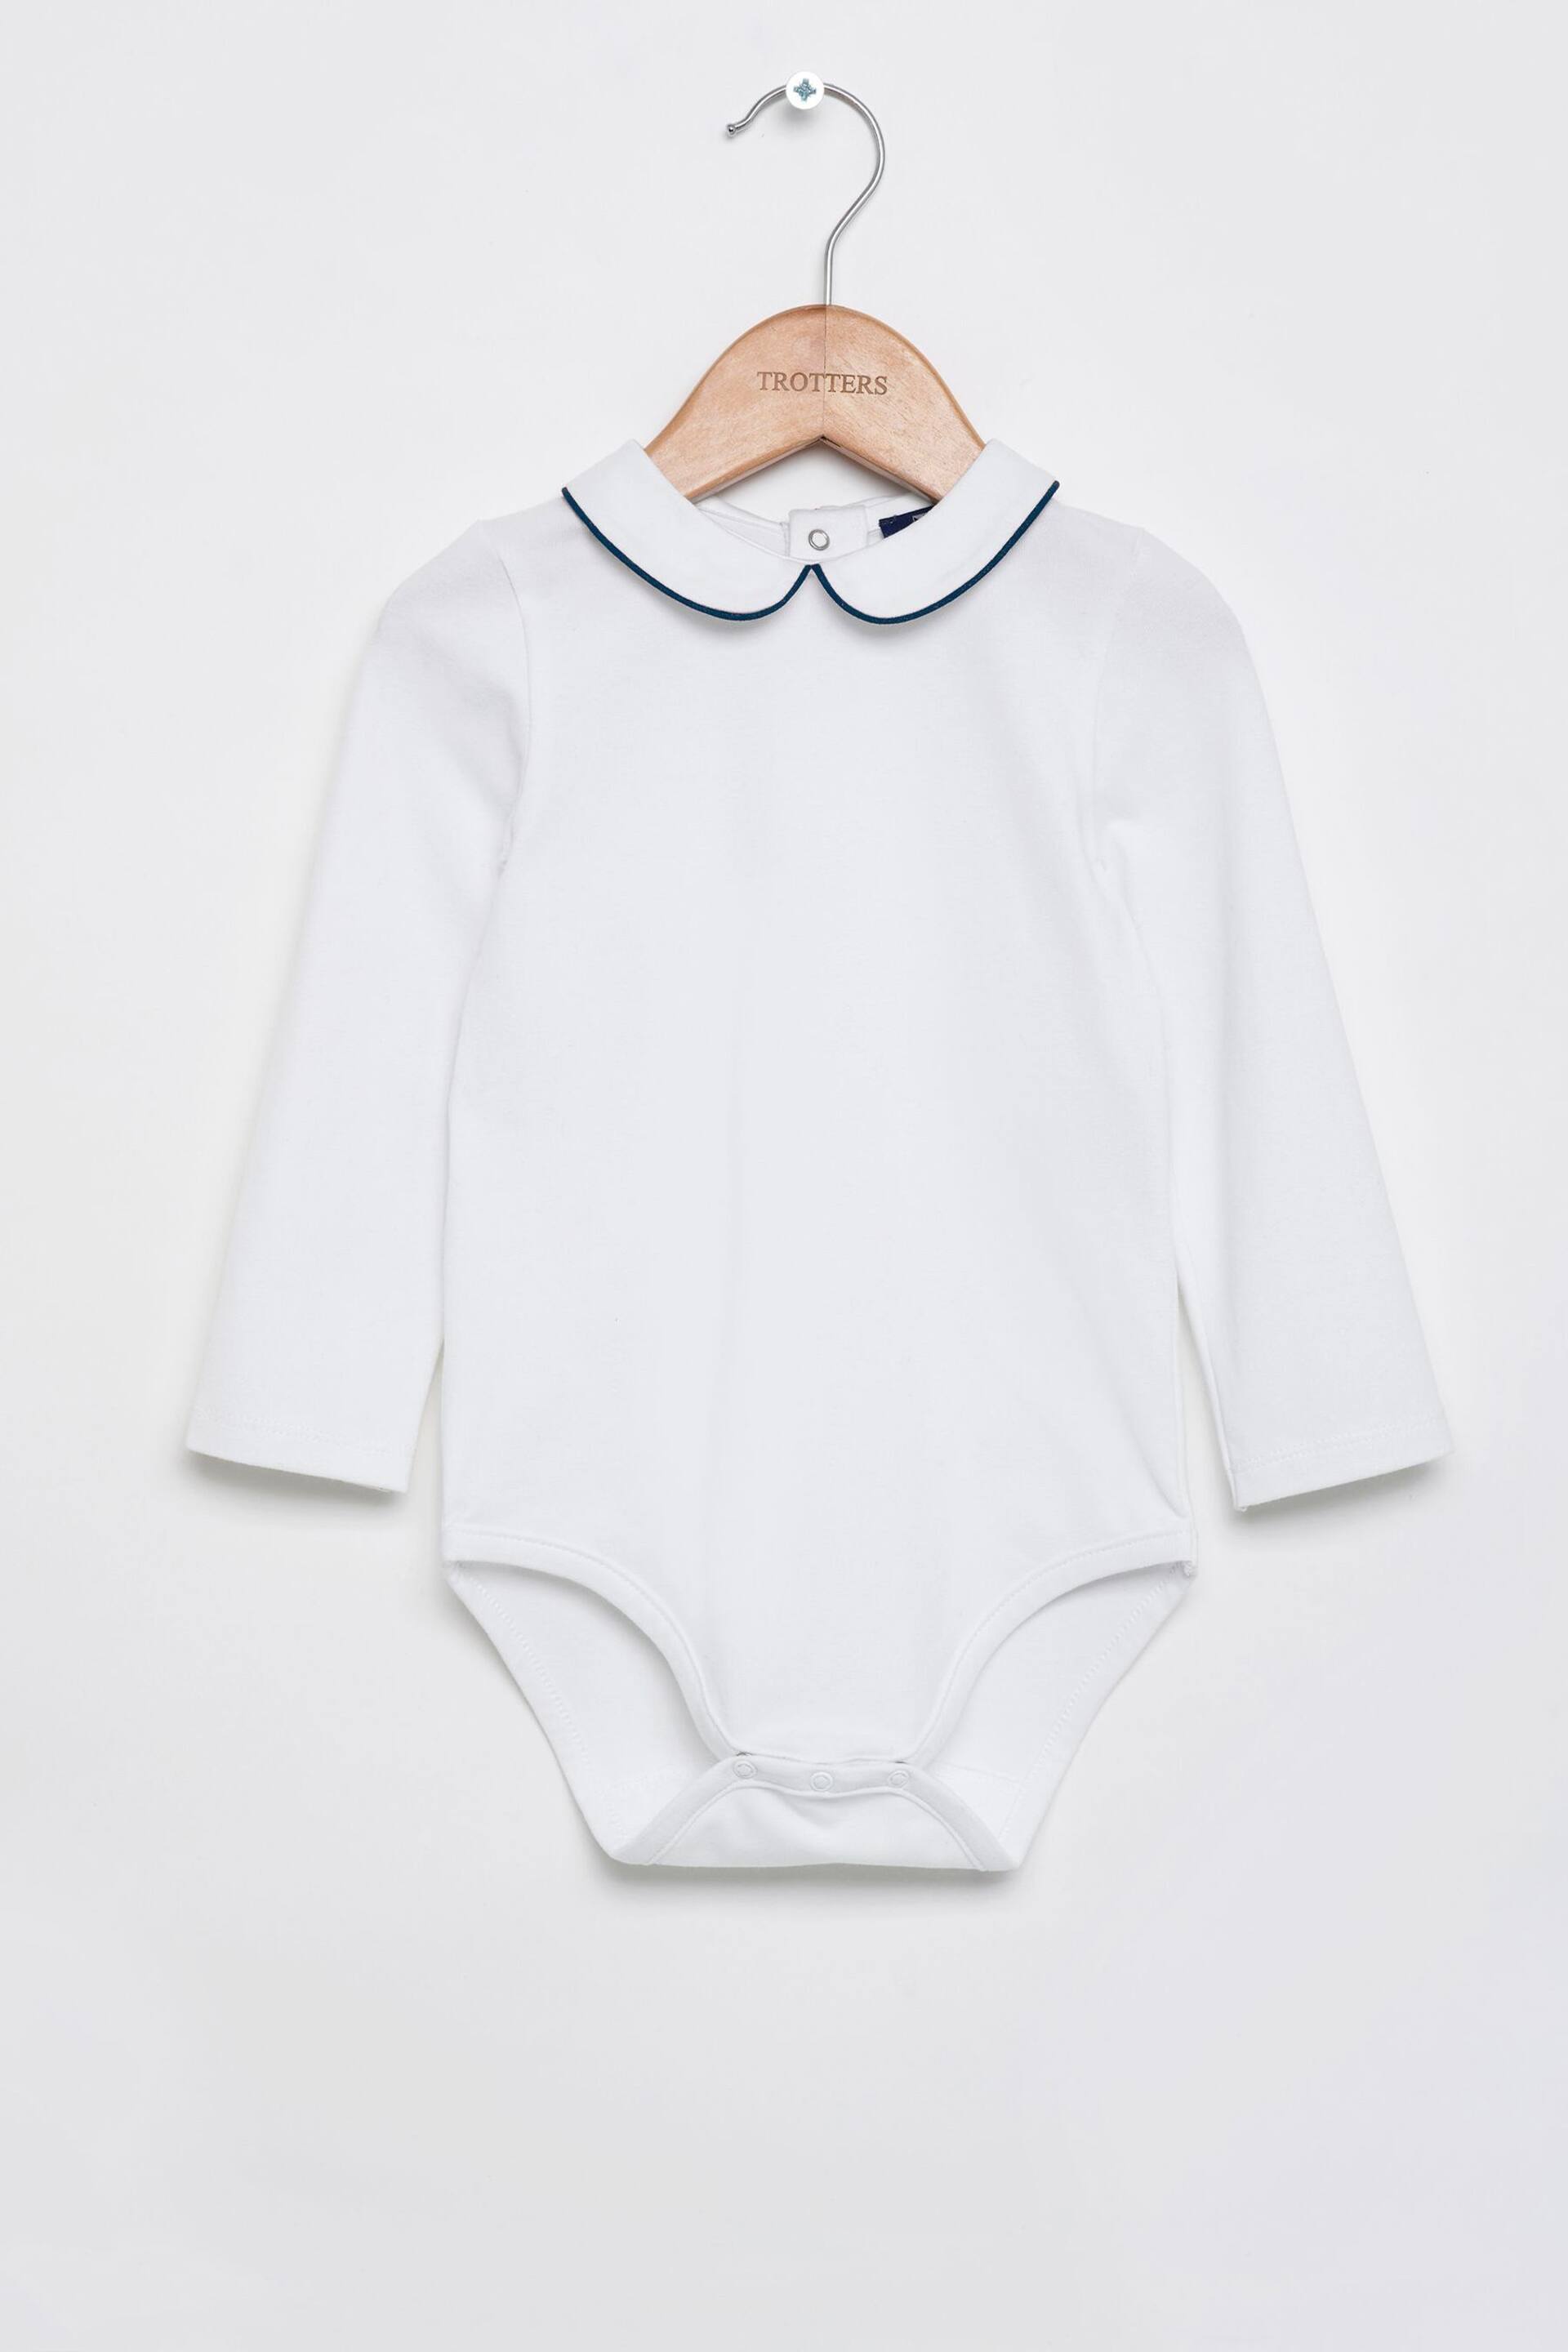 Trotters London Long Sleeve White Milo Piped Body - Image 1 of 3